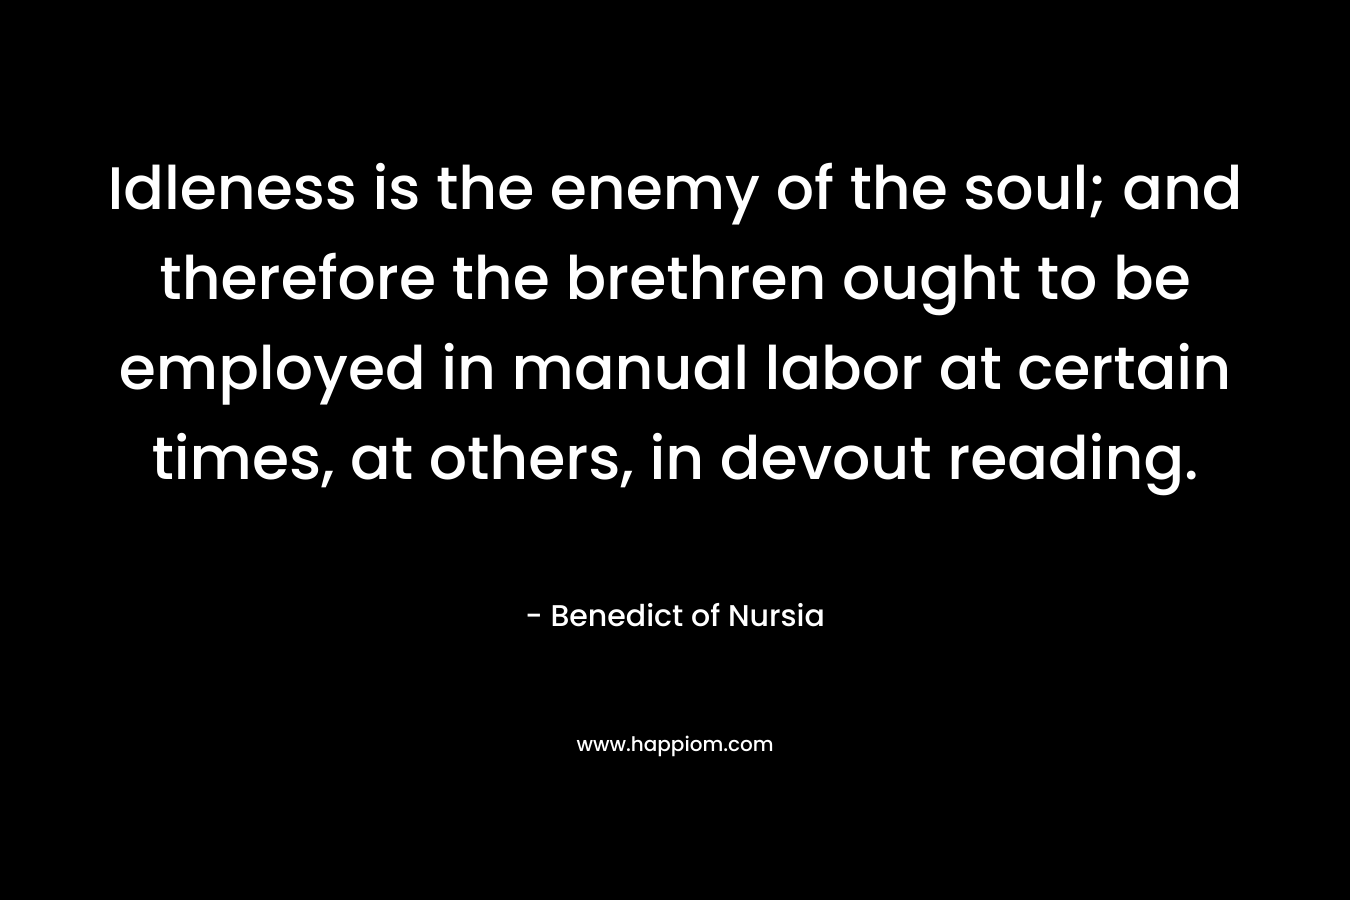 Idleness is the enemy of the soul; and therefore the brethren ought to be employed in manual labor at certain times, at others, in devout reading. – Benedict of Nursia